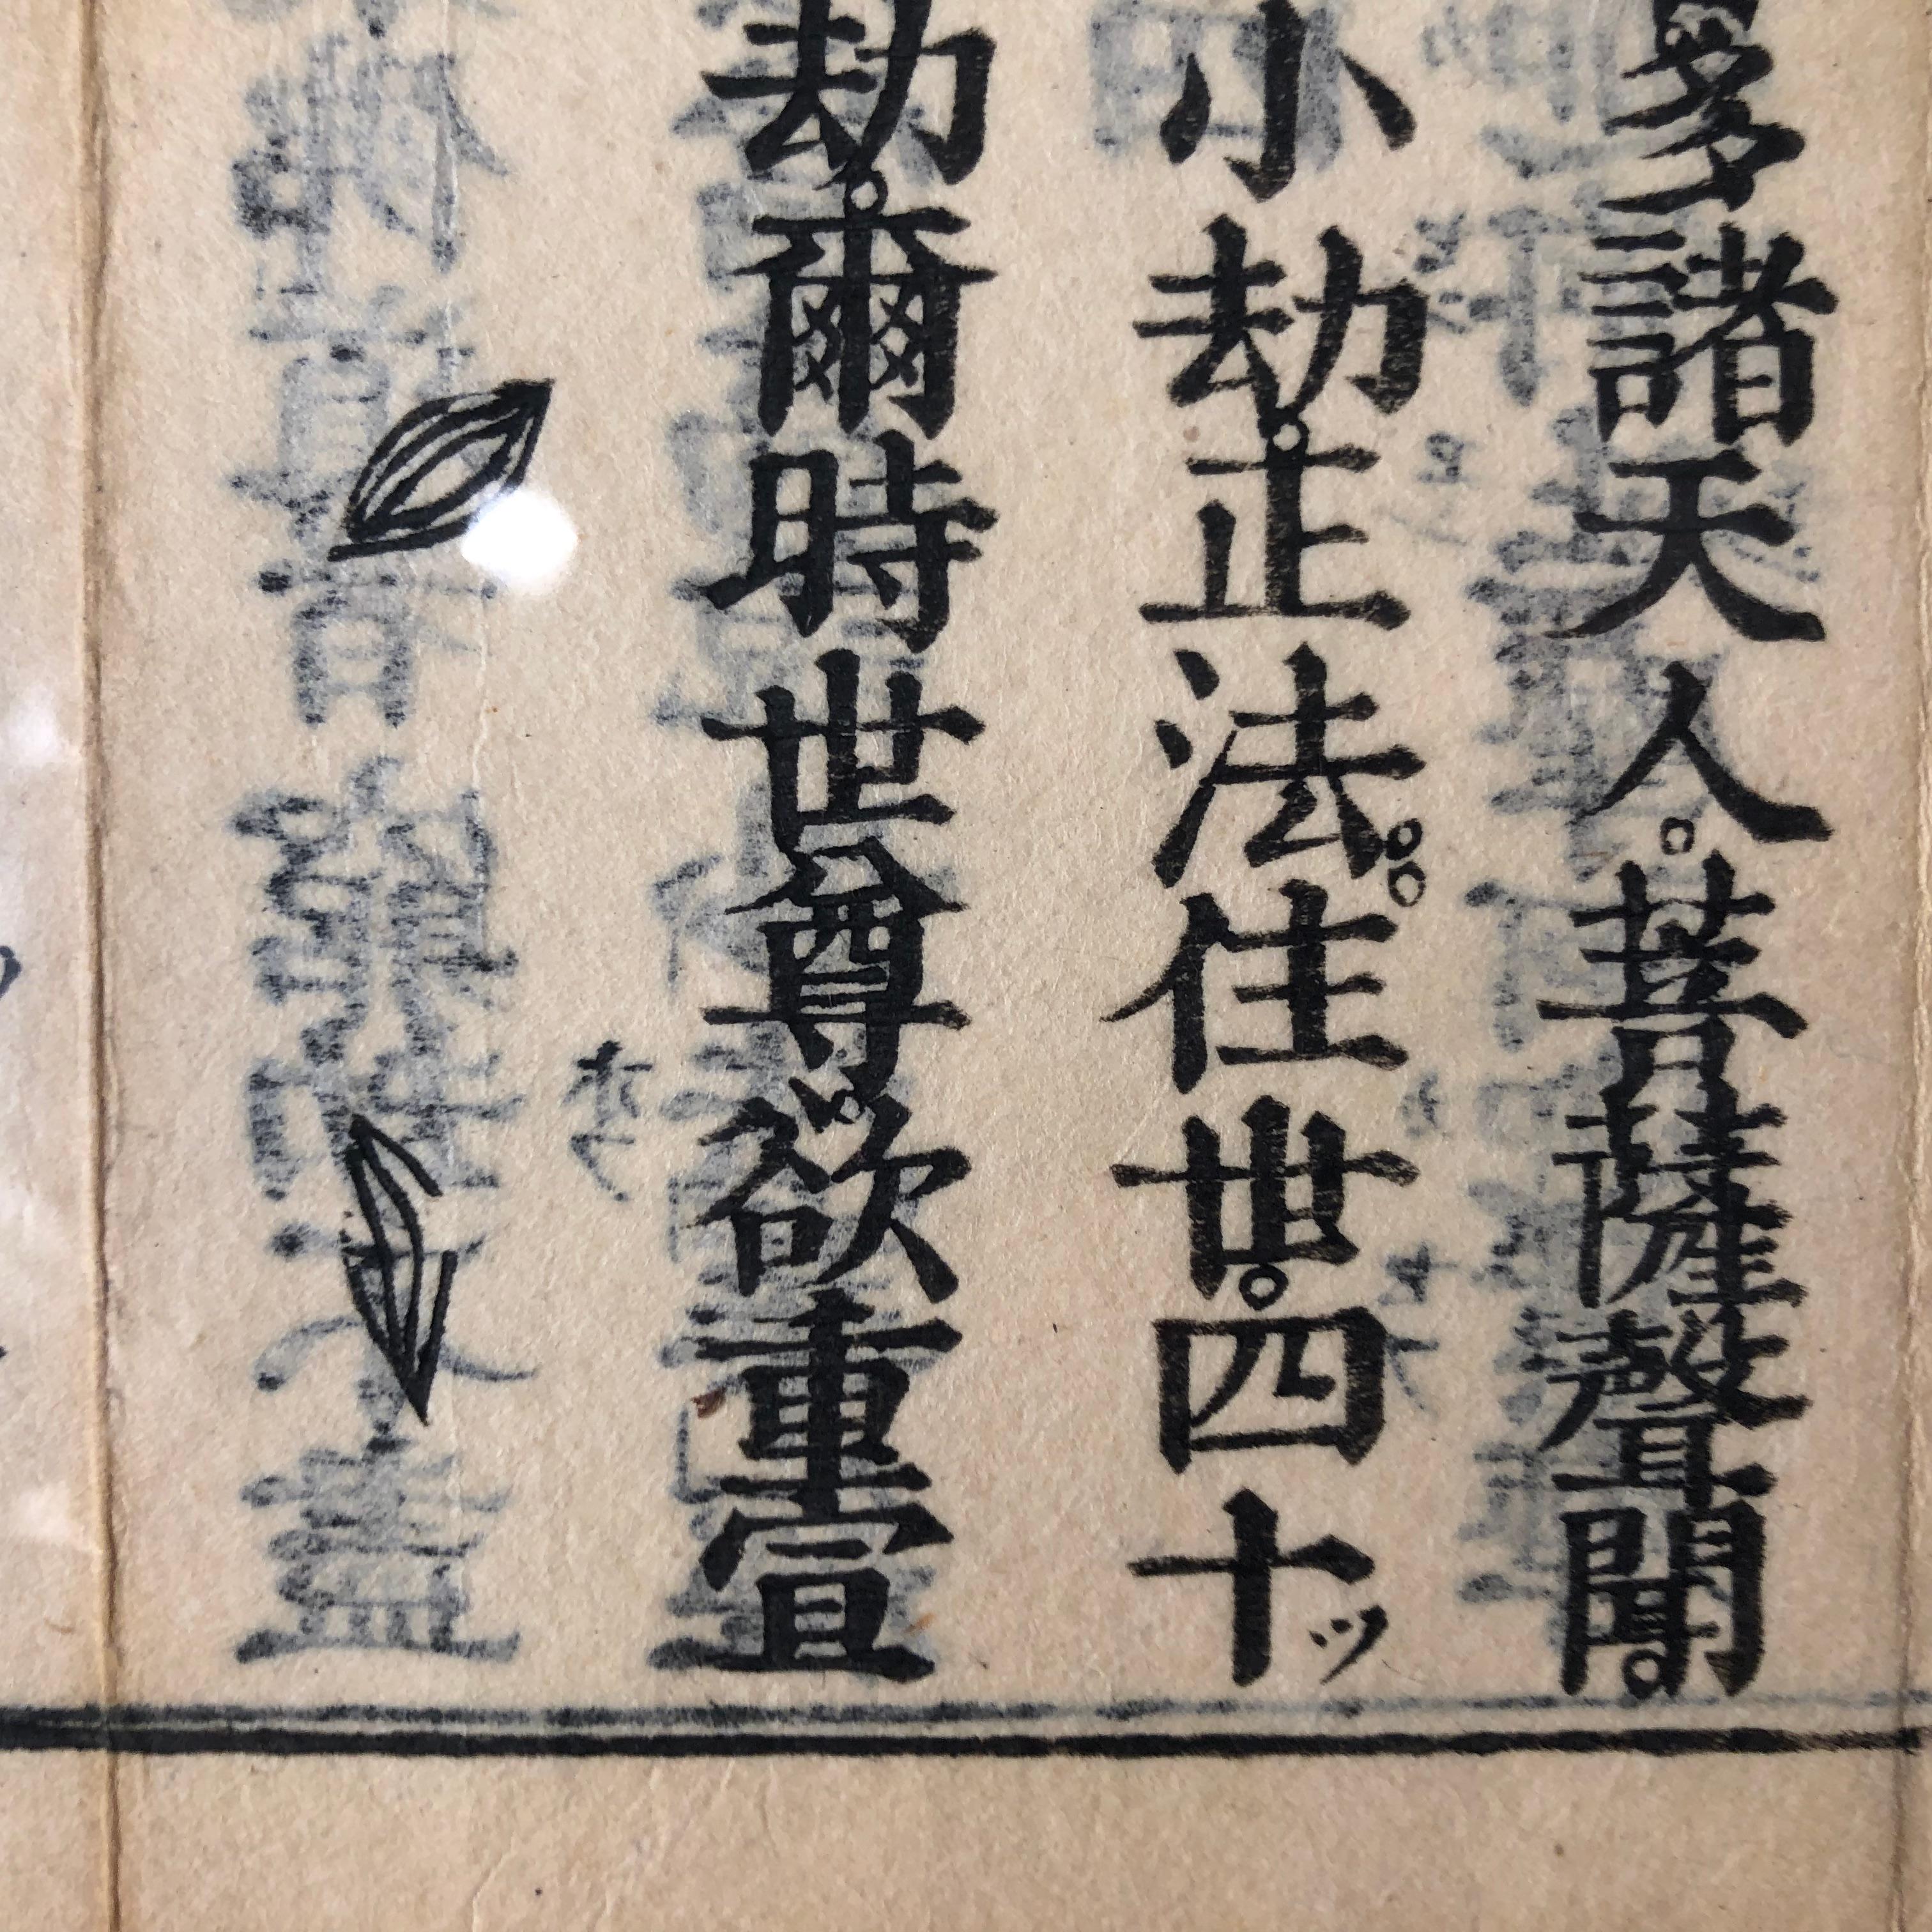 Japanese Four Antique Buddhist SACRED SUTRAS Woodblock Prints 1878, Frameable #1 3